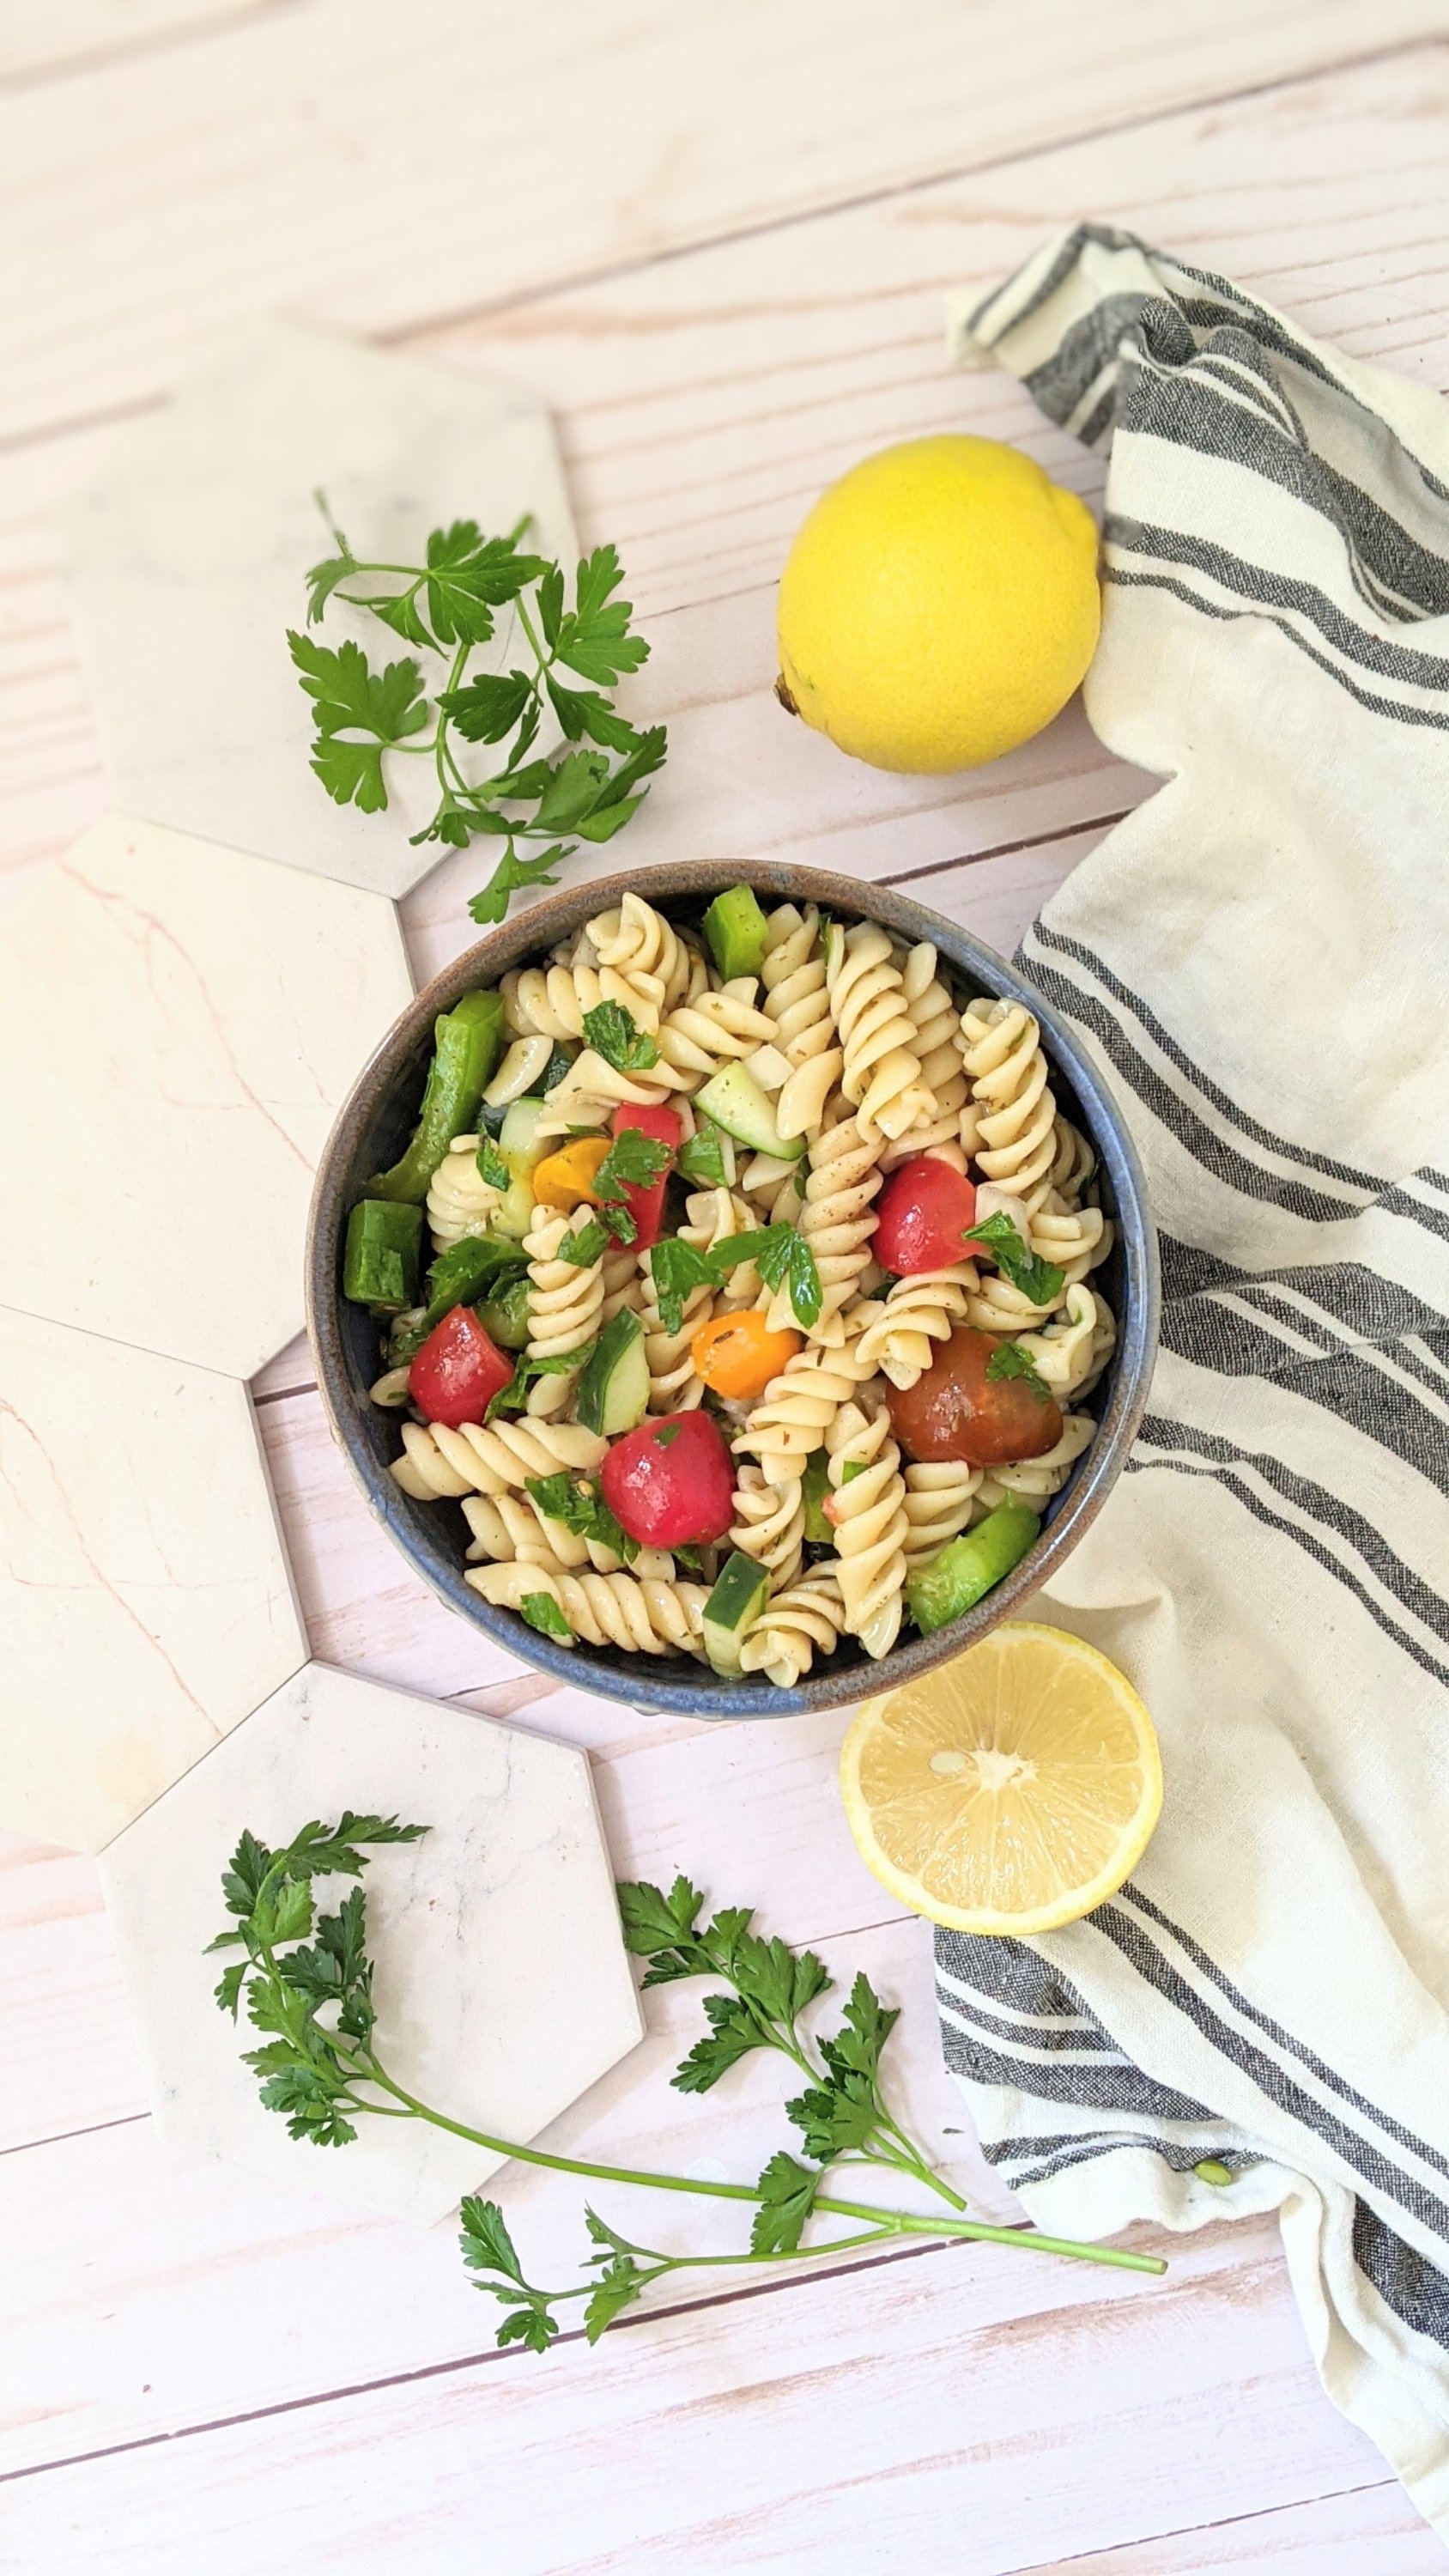 vegetarian lemon herb pasta salad recipe gluten free vegan pasta salads with tomatoes and a lemon herb vinaigrette recipe 30 minute pasta salad recipes for entertaining potlucks and bbq sides vegetarian healthy